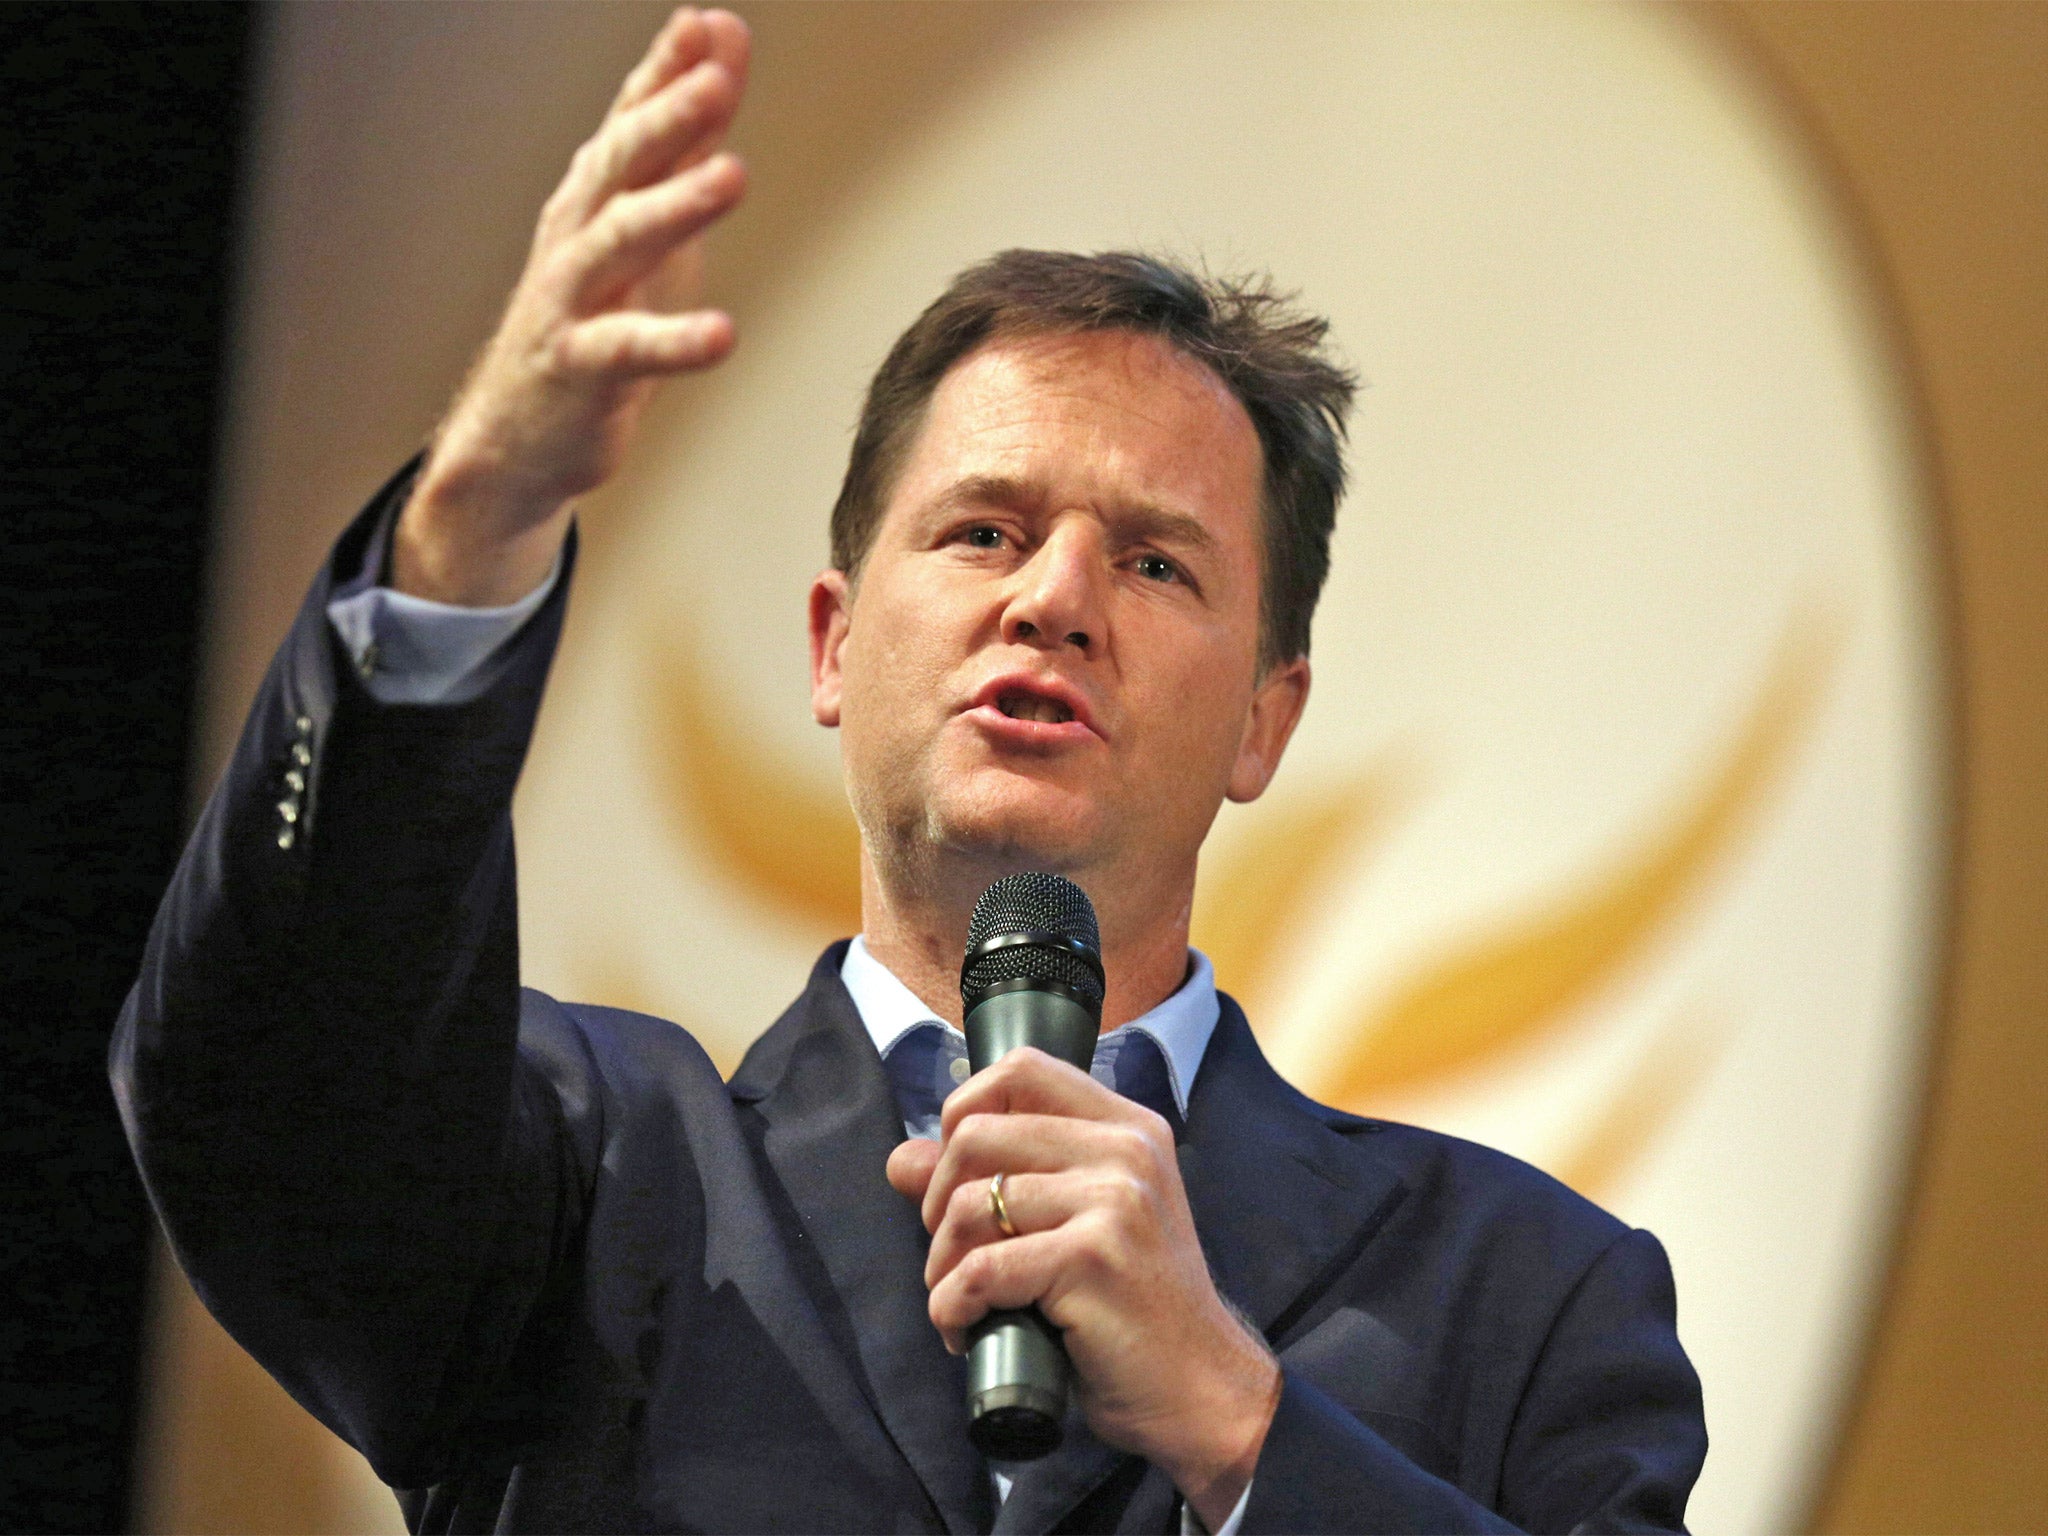 Clegg said there was no prospect of an early end to the coalition